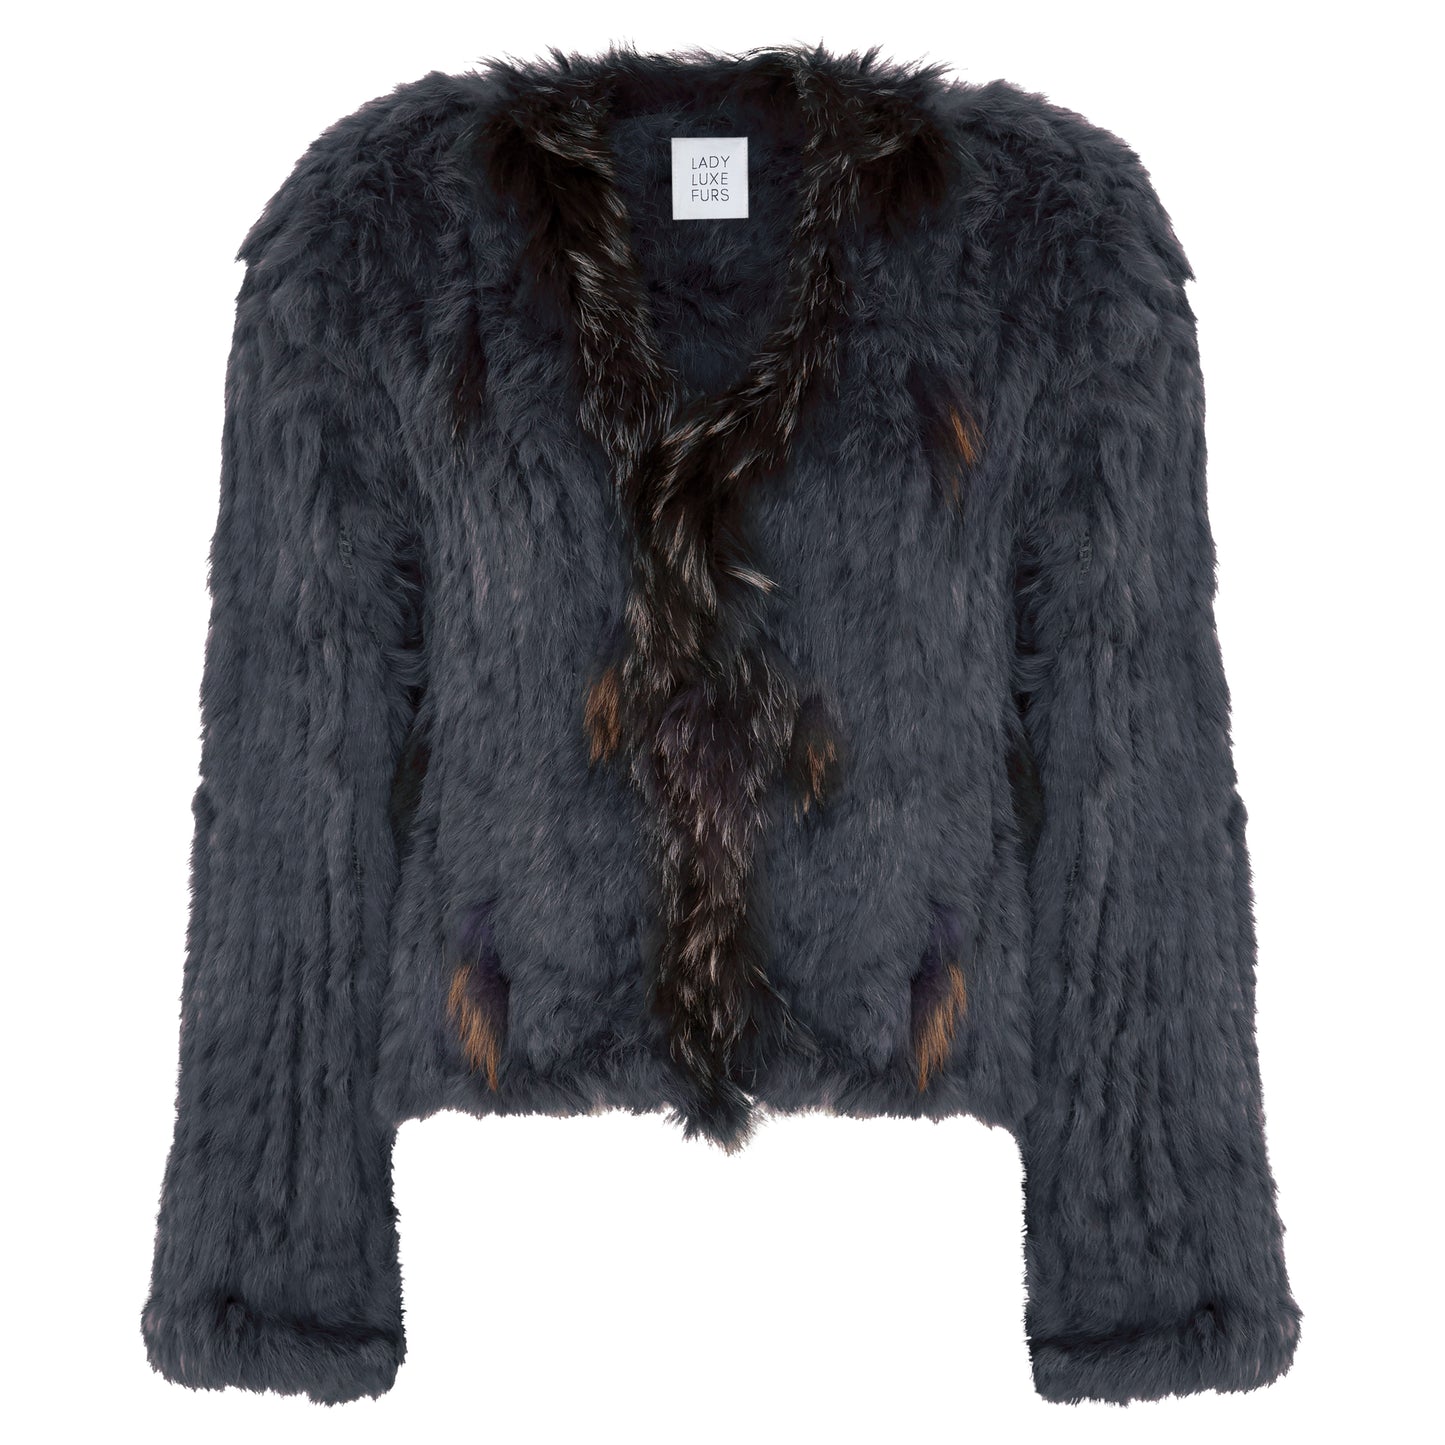 Lady Luxe Furs Jacket Gunmetal – Birds of a Feather Couture